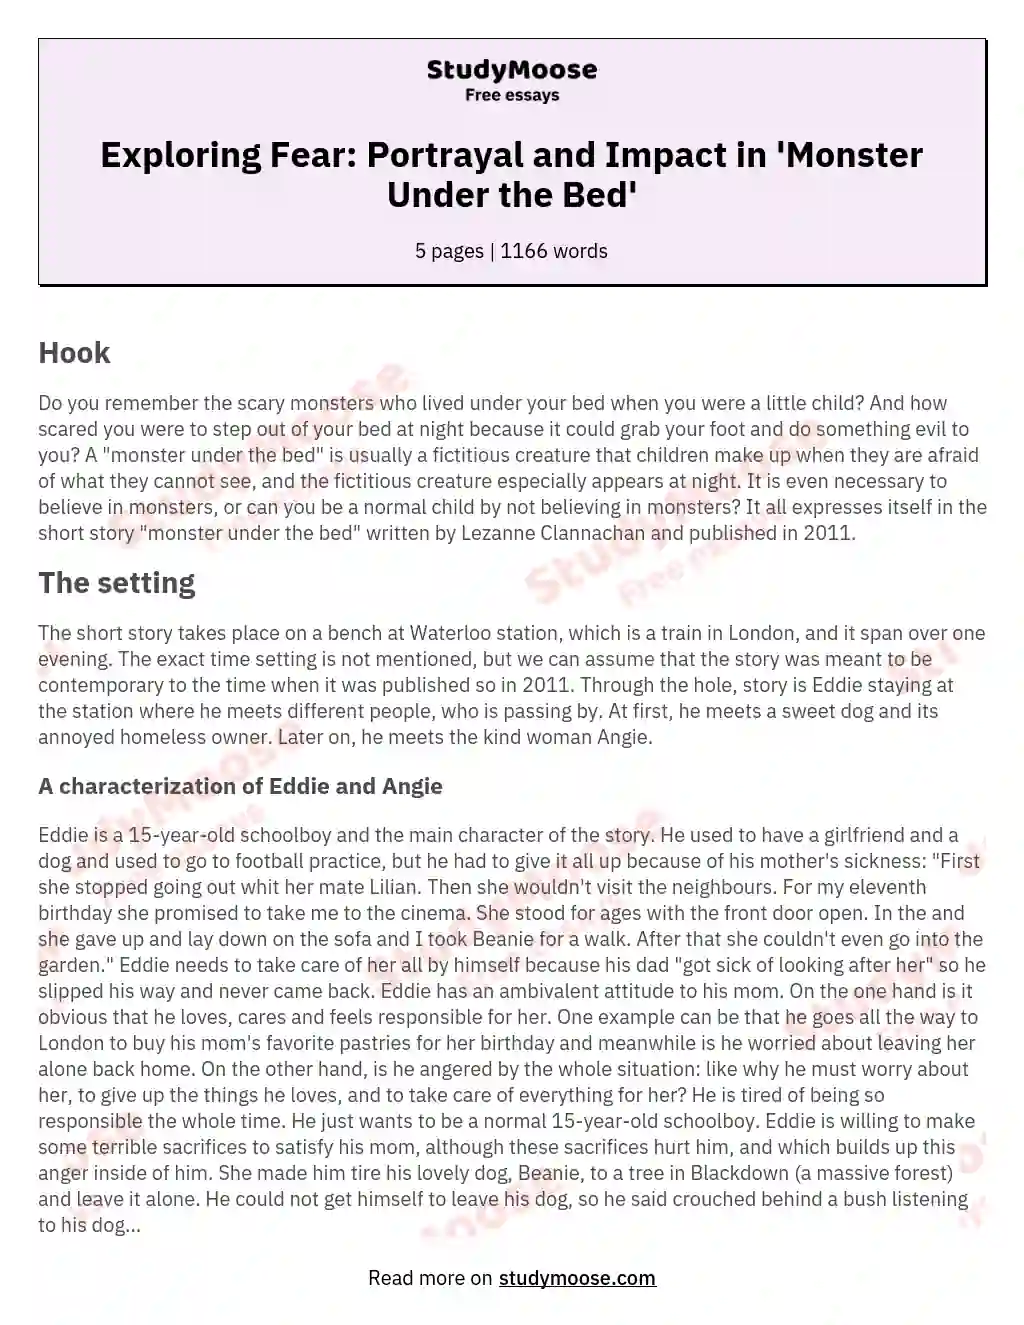 Exploring Fear: Portrayal and Impact in 'Monster Under the Bed' essay